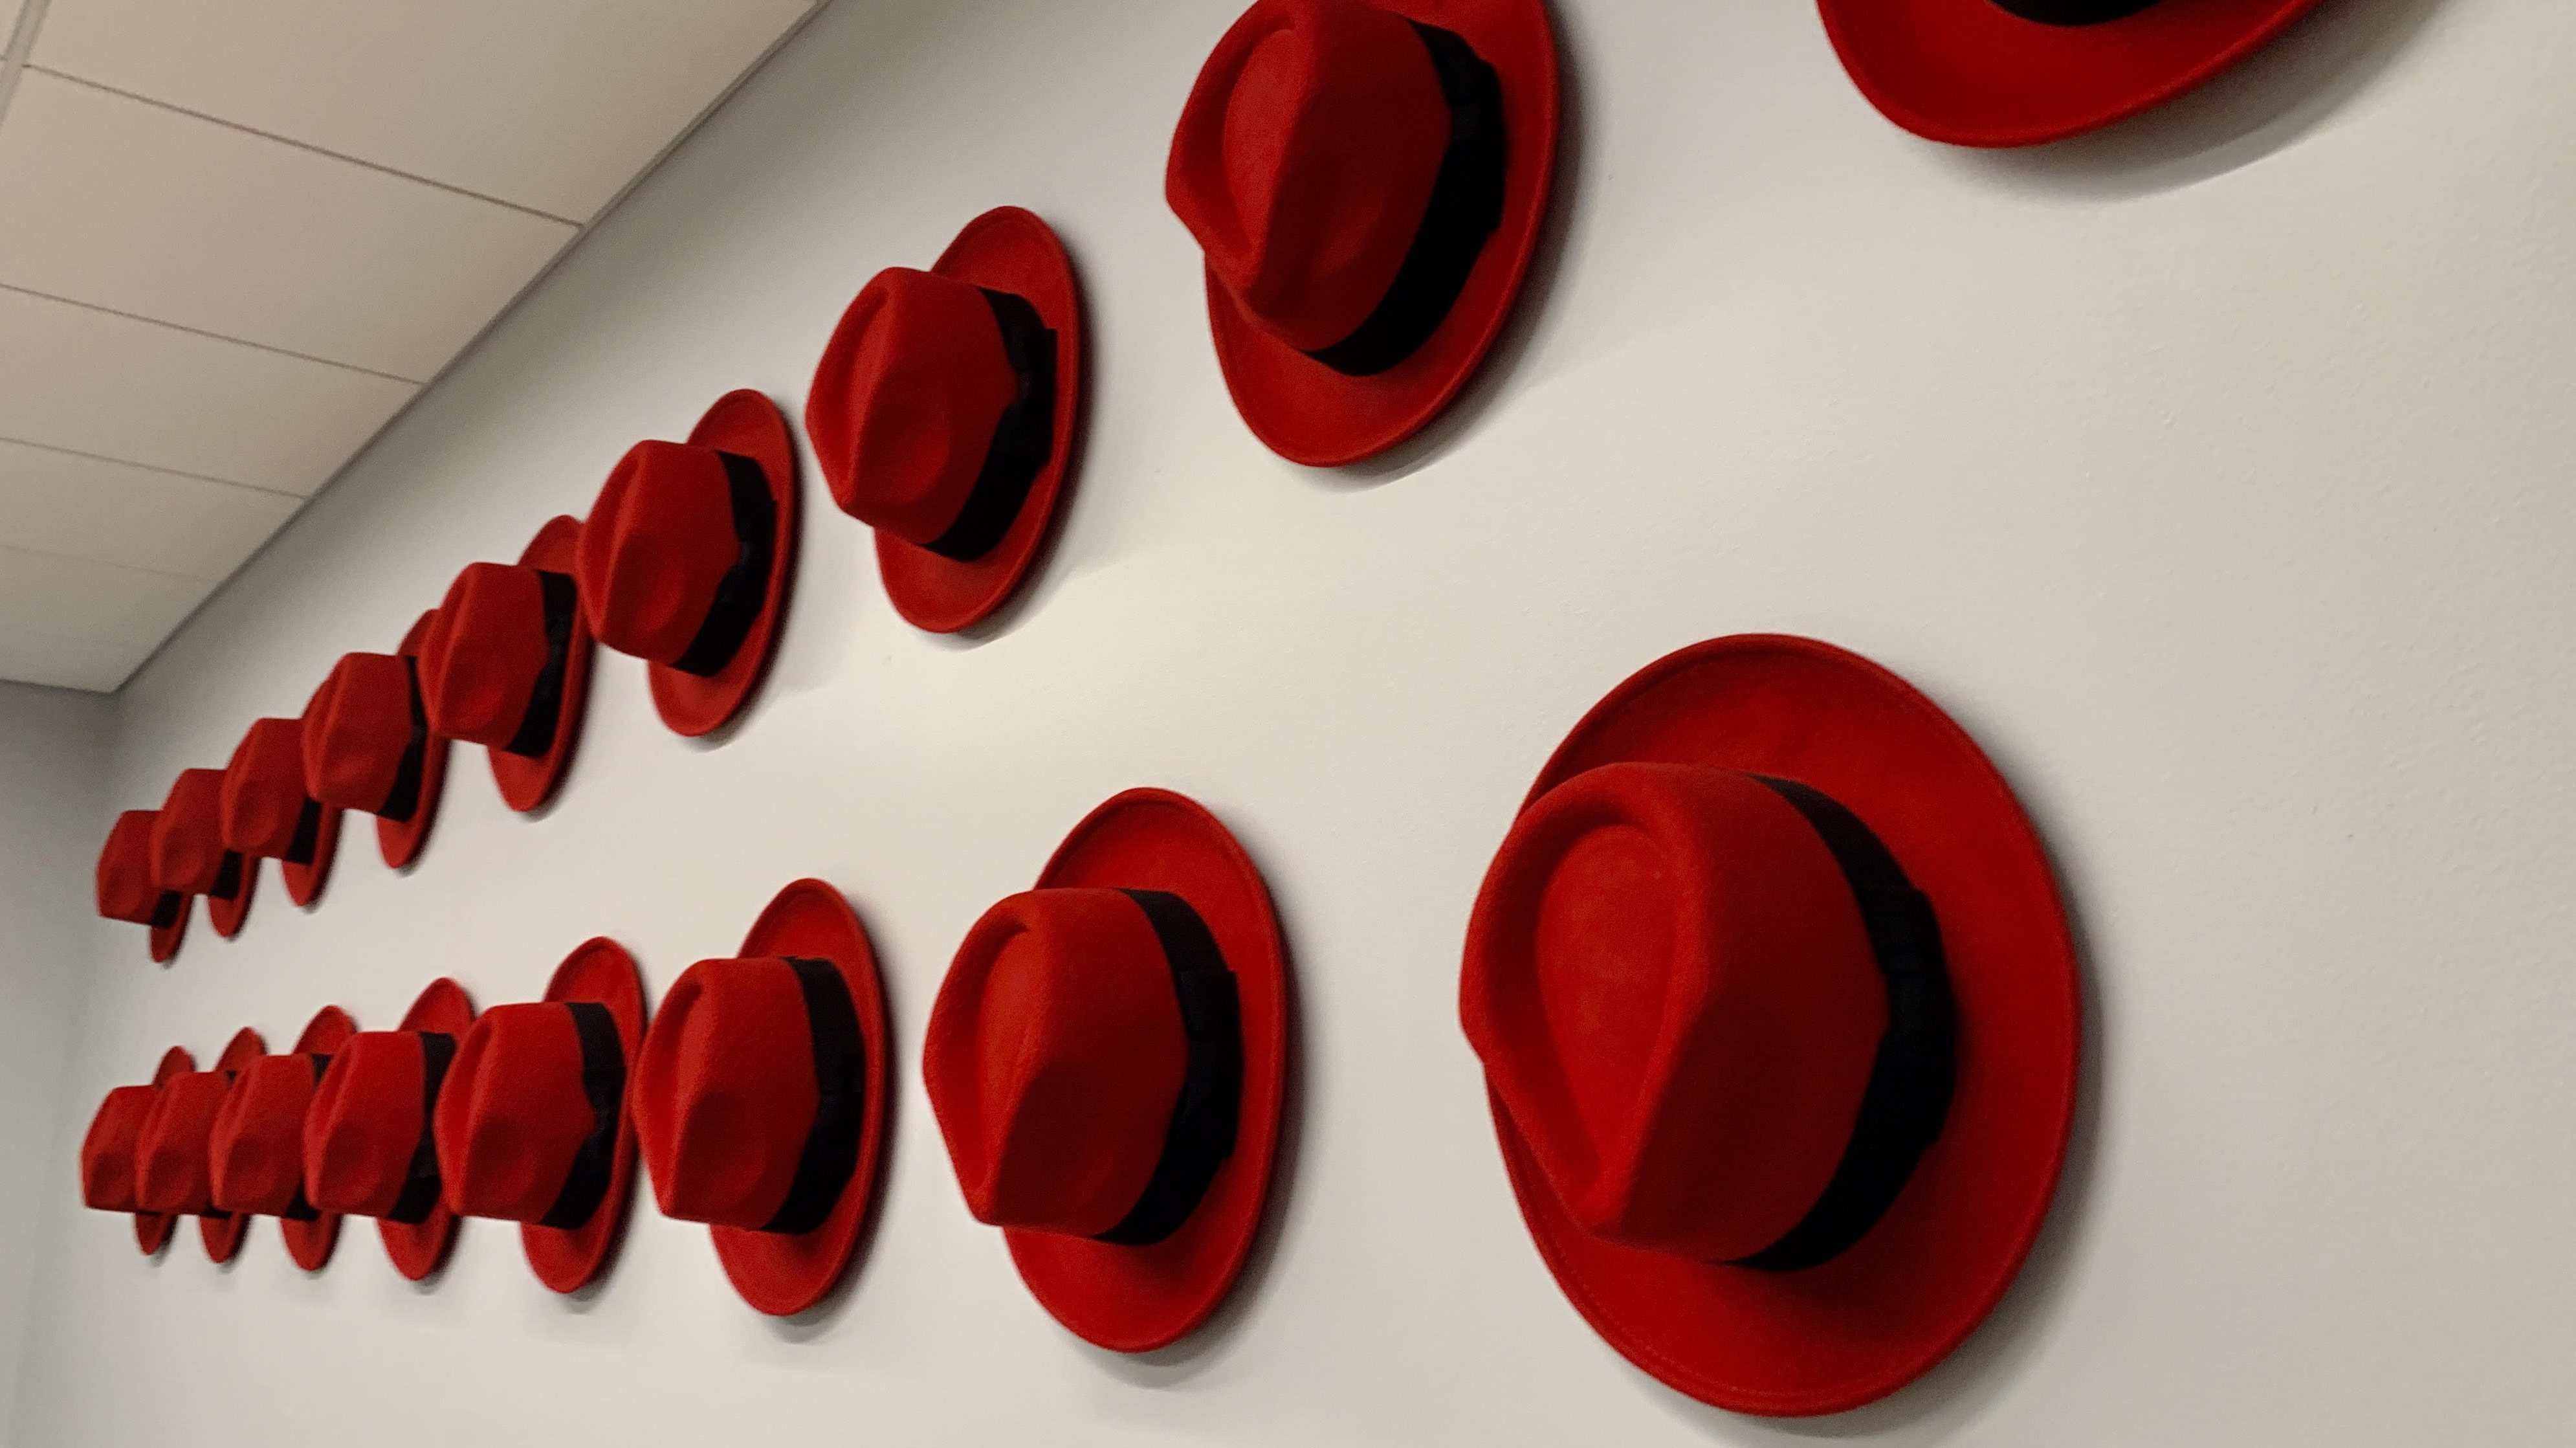 Red Hat cutting hundreds of jobs, CEO says in letter to employees | WRAL TechWire